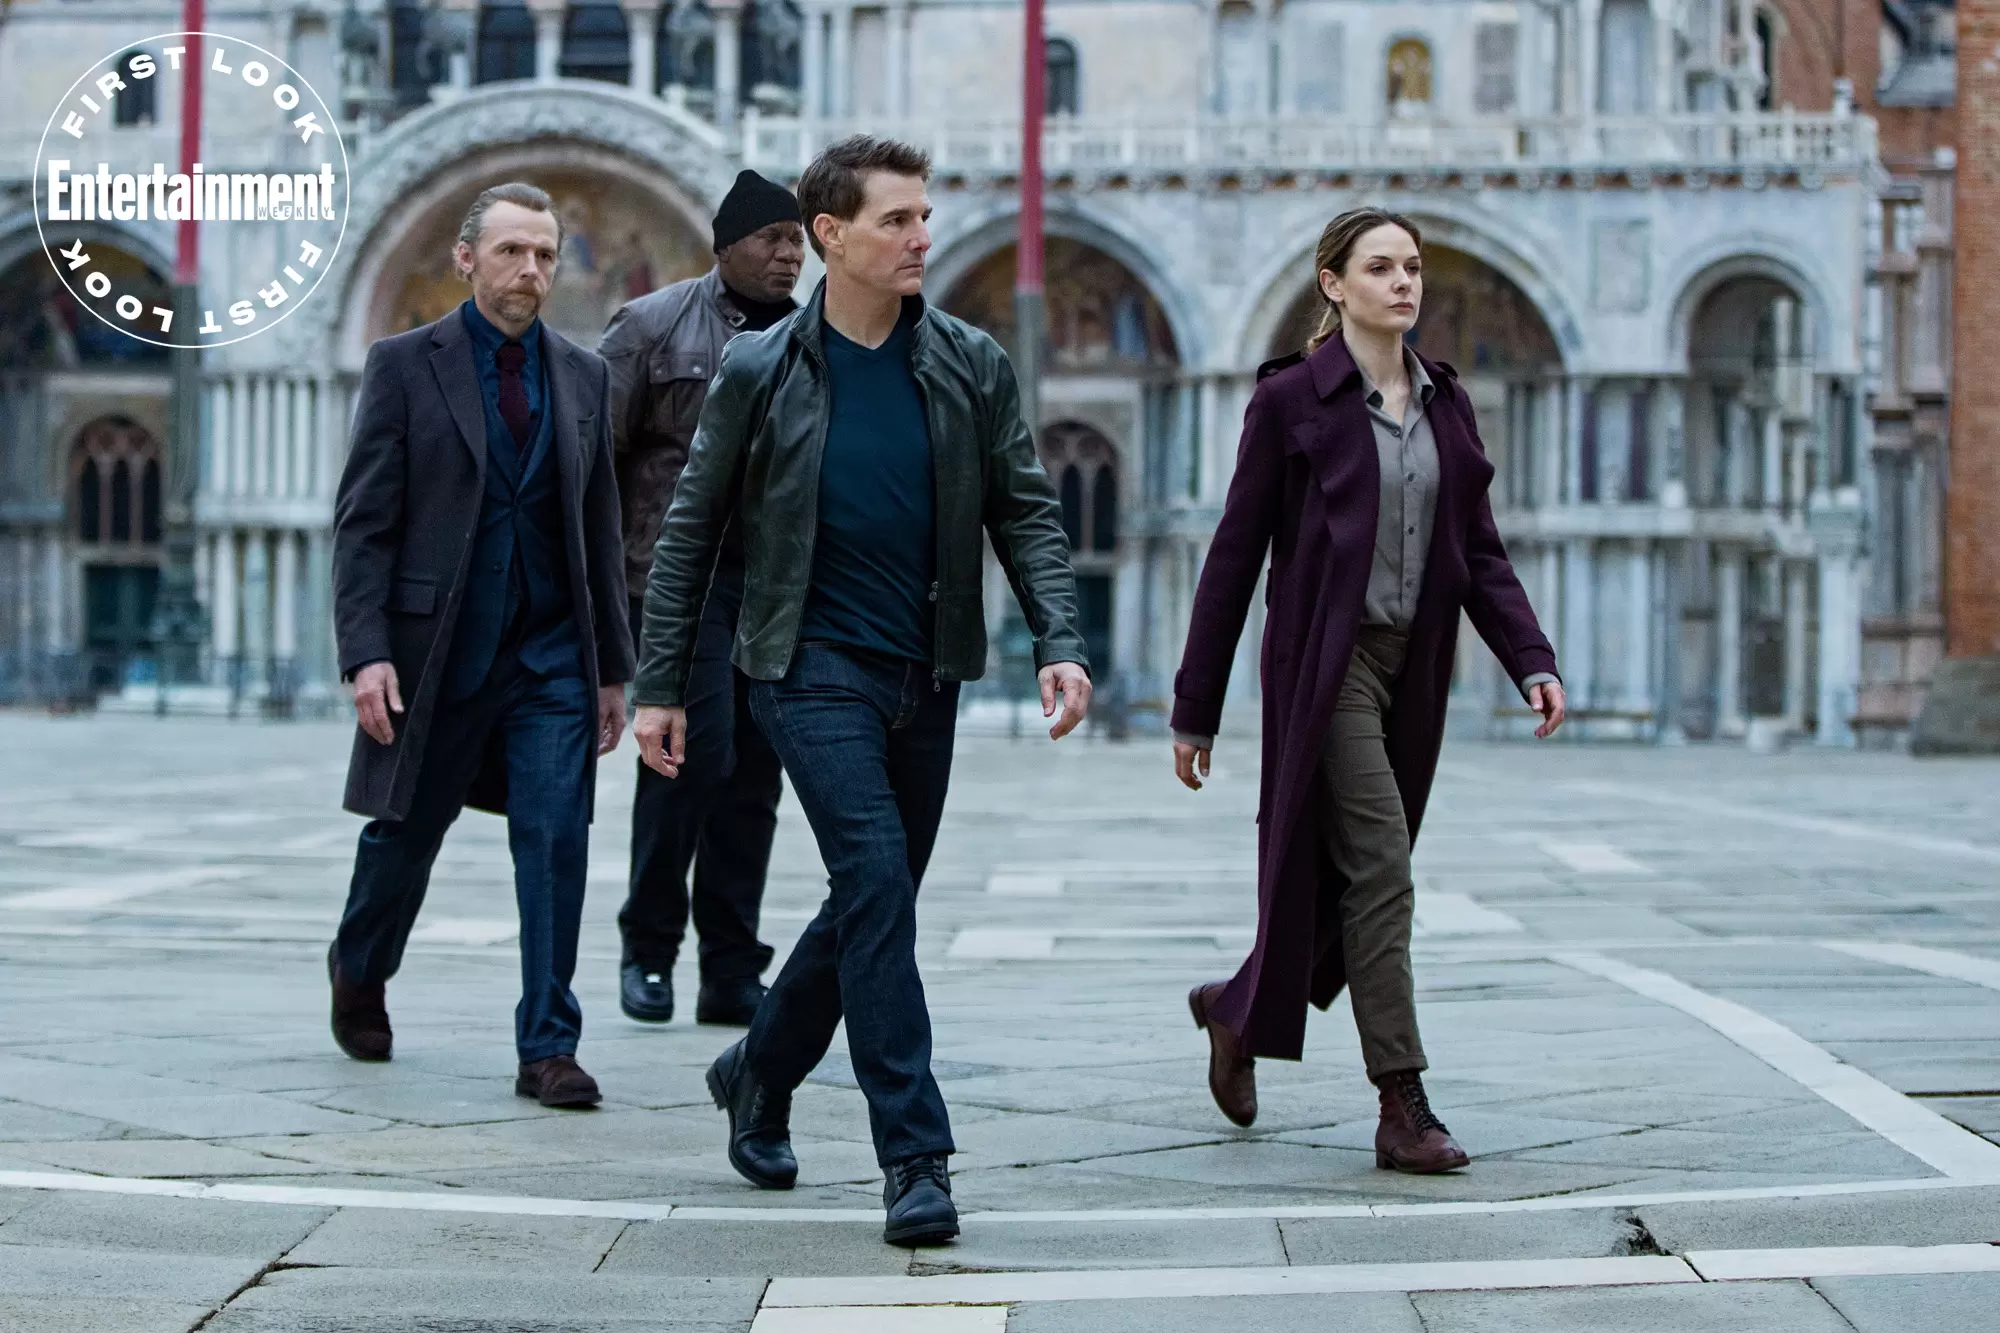 Tom Cruise is on the run in new New Mission: Impossible – Dead Reckoning Part One images